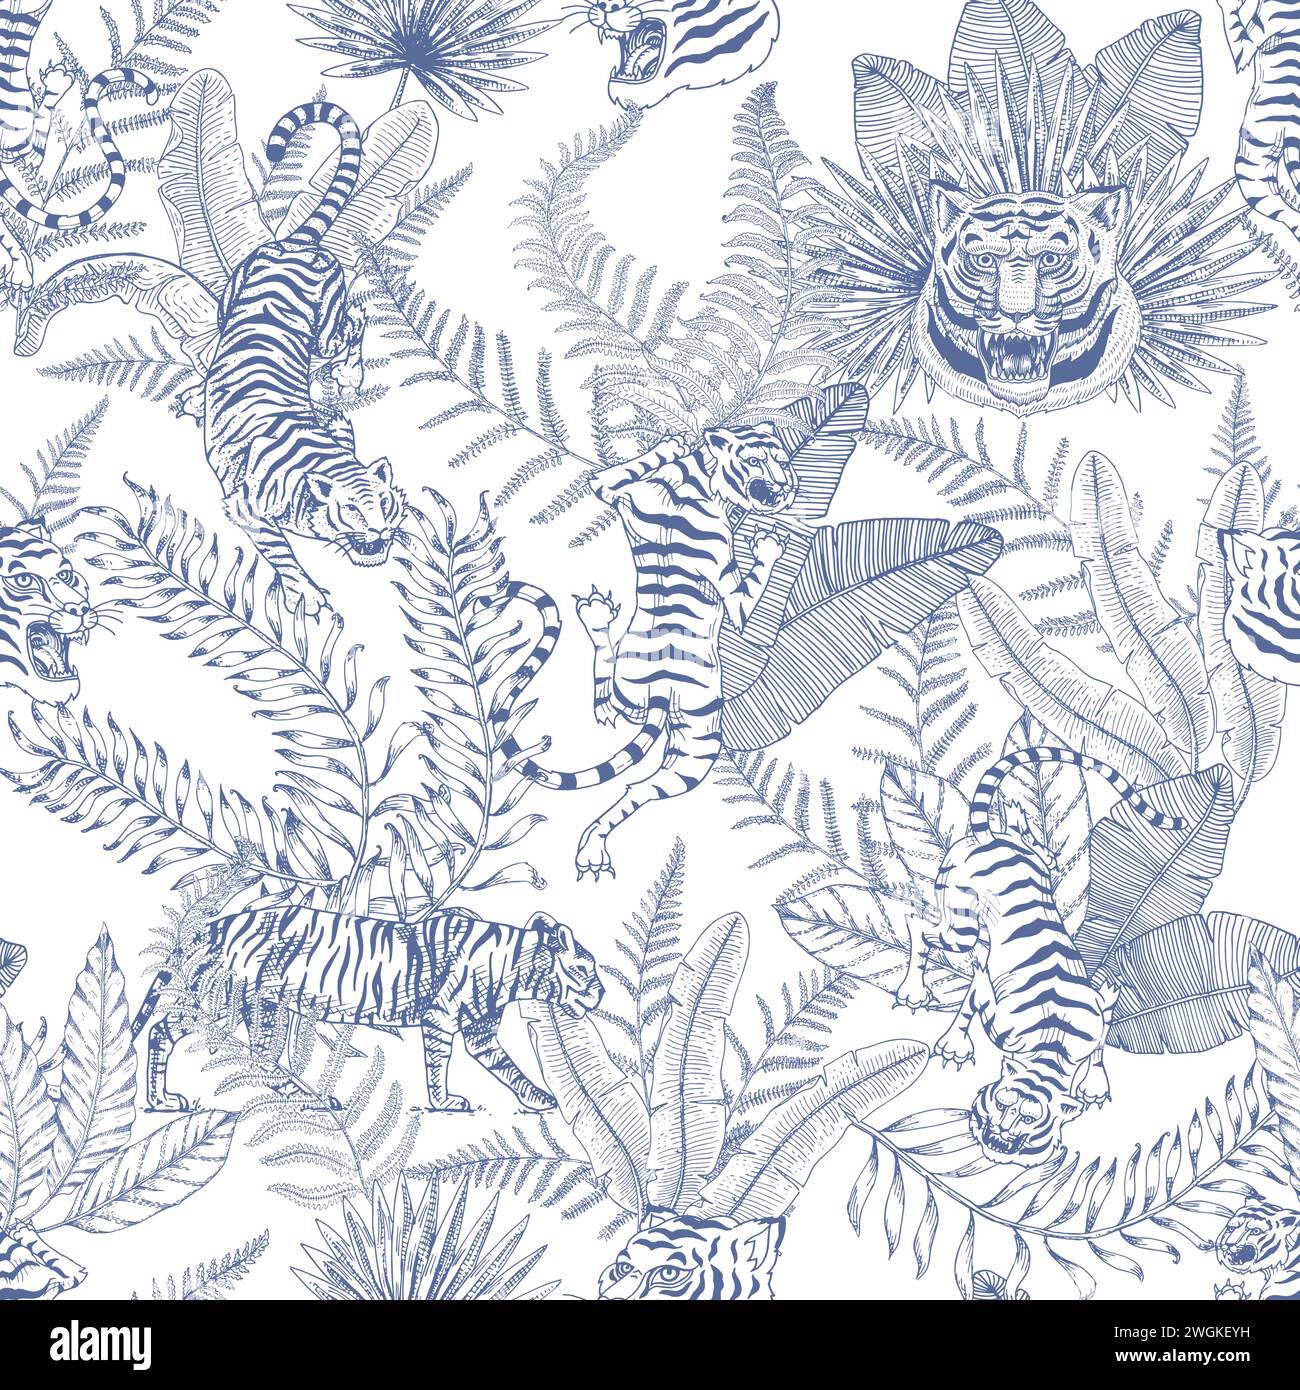 Japanese tigers with tropical leaves. Toile de jouy jungle. Wild animal with green plants. Banner or poster for advertising or web. Stock Vector